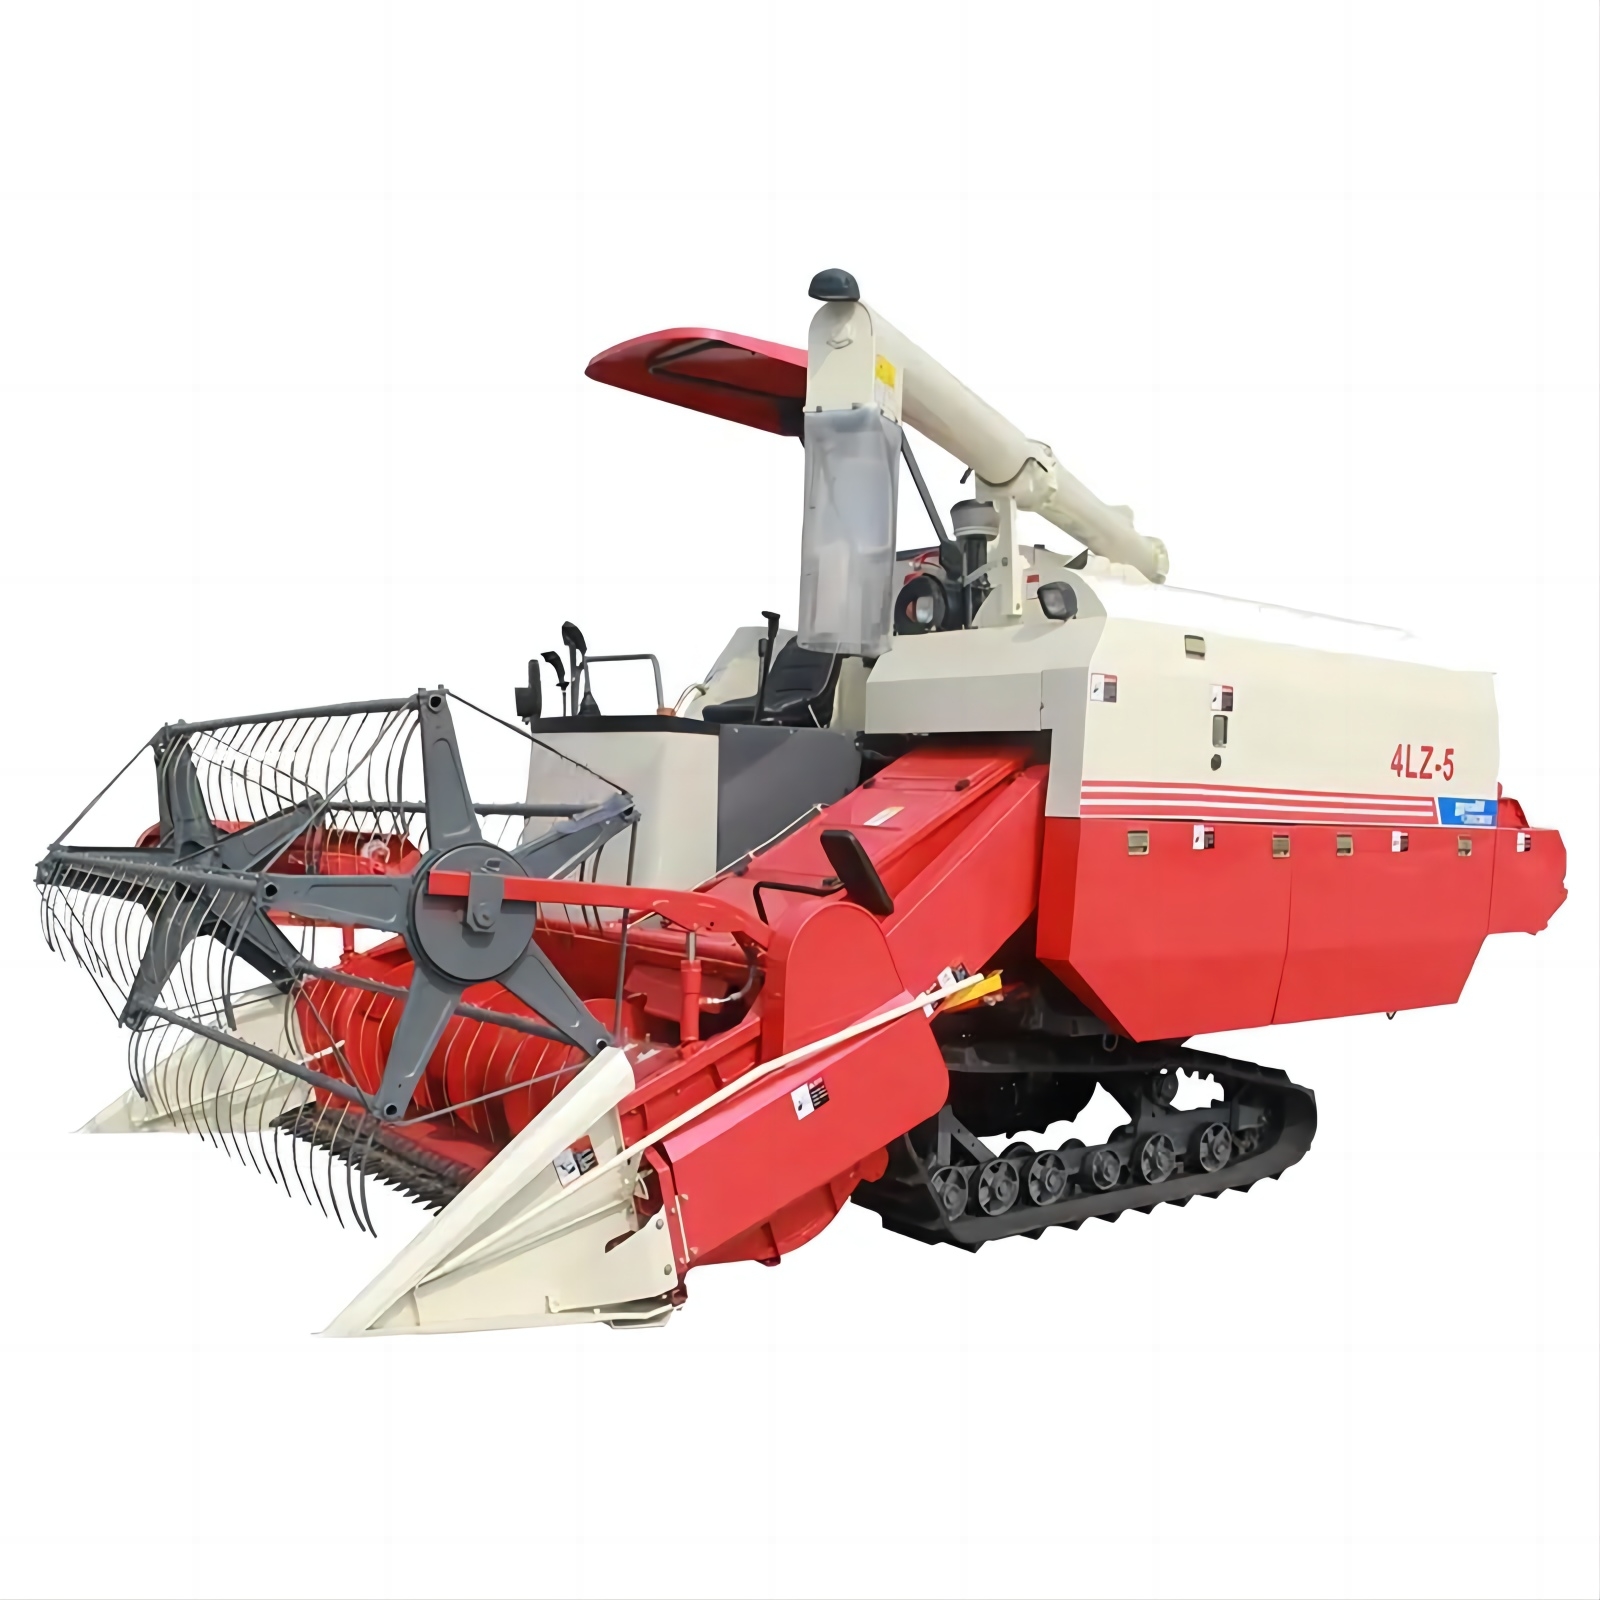 Agriculture machinery 2.2 meter wide 4LZ-5 mini ride-on combine rice harvester.jpg